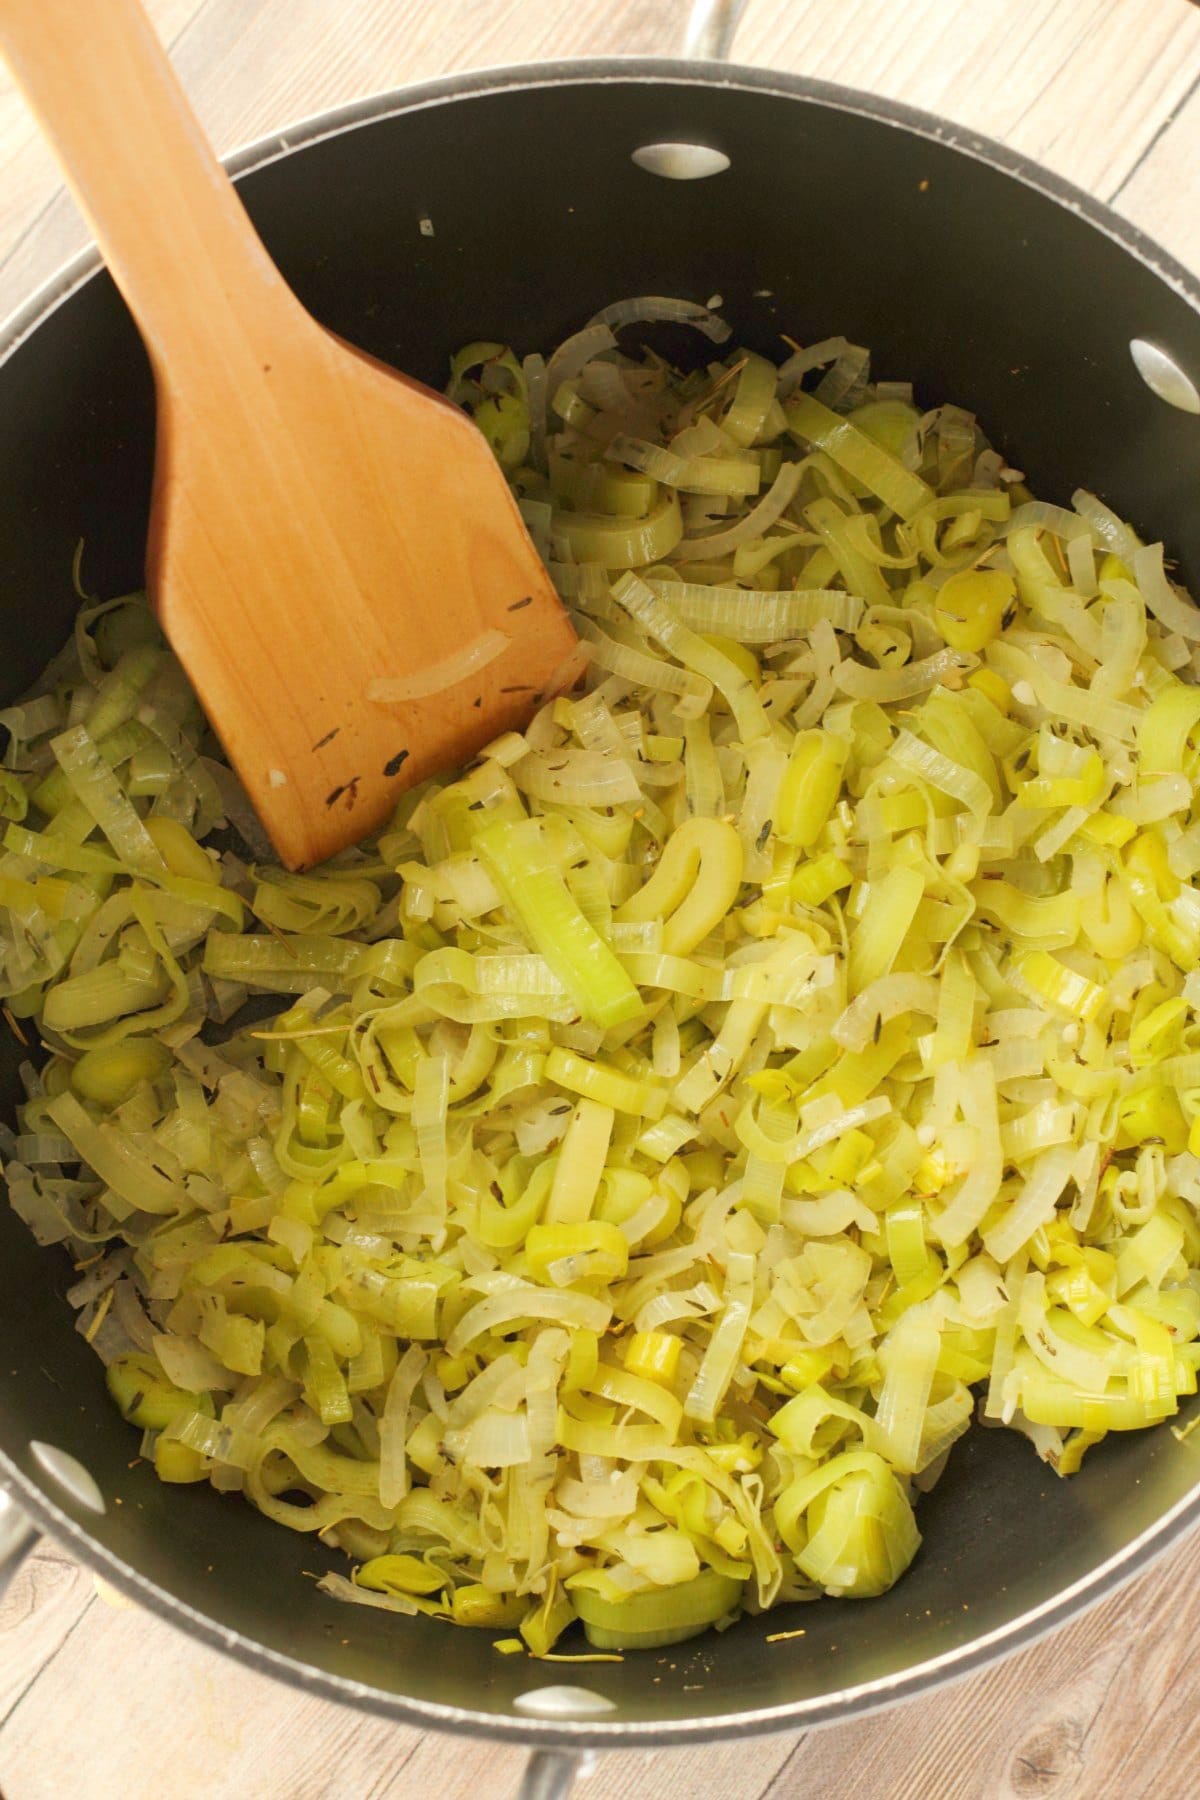 Chopped onions, chopped leeks, crushed garlic and olive oil sautéed in a pot.